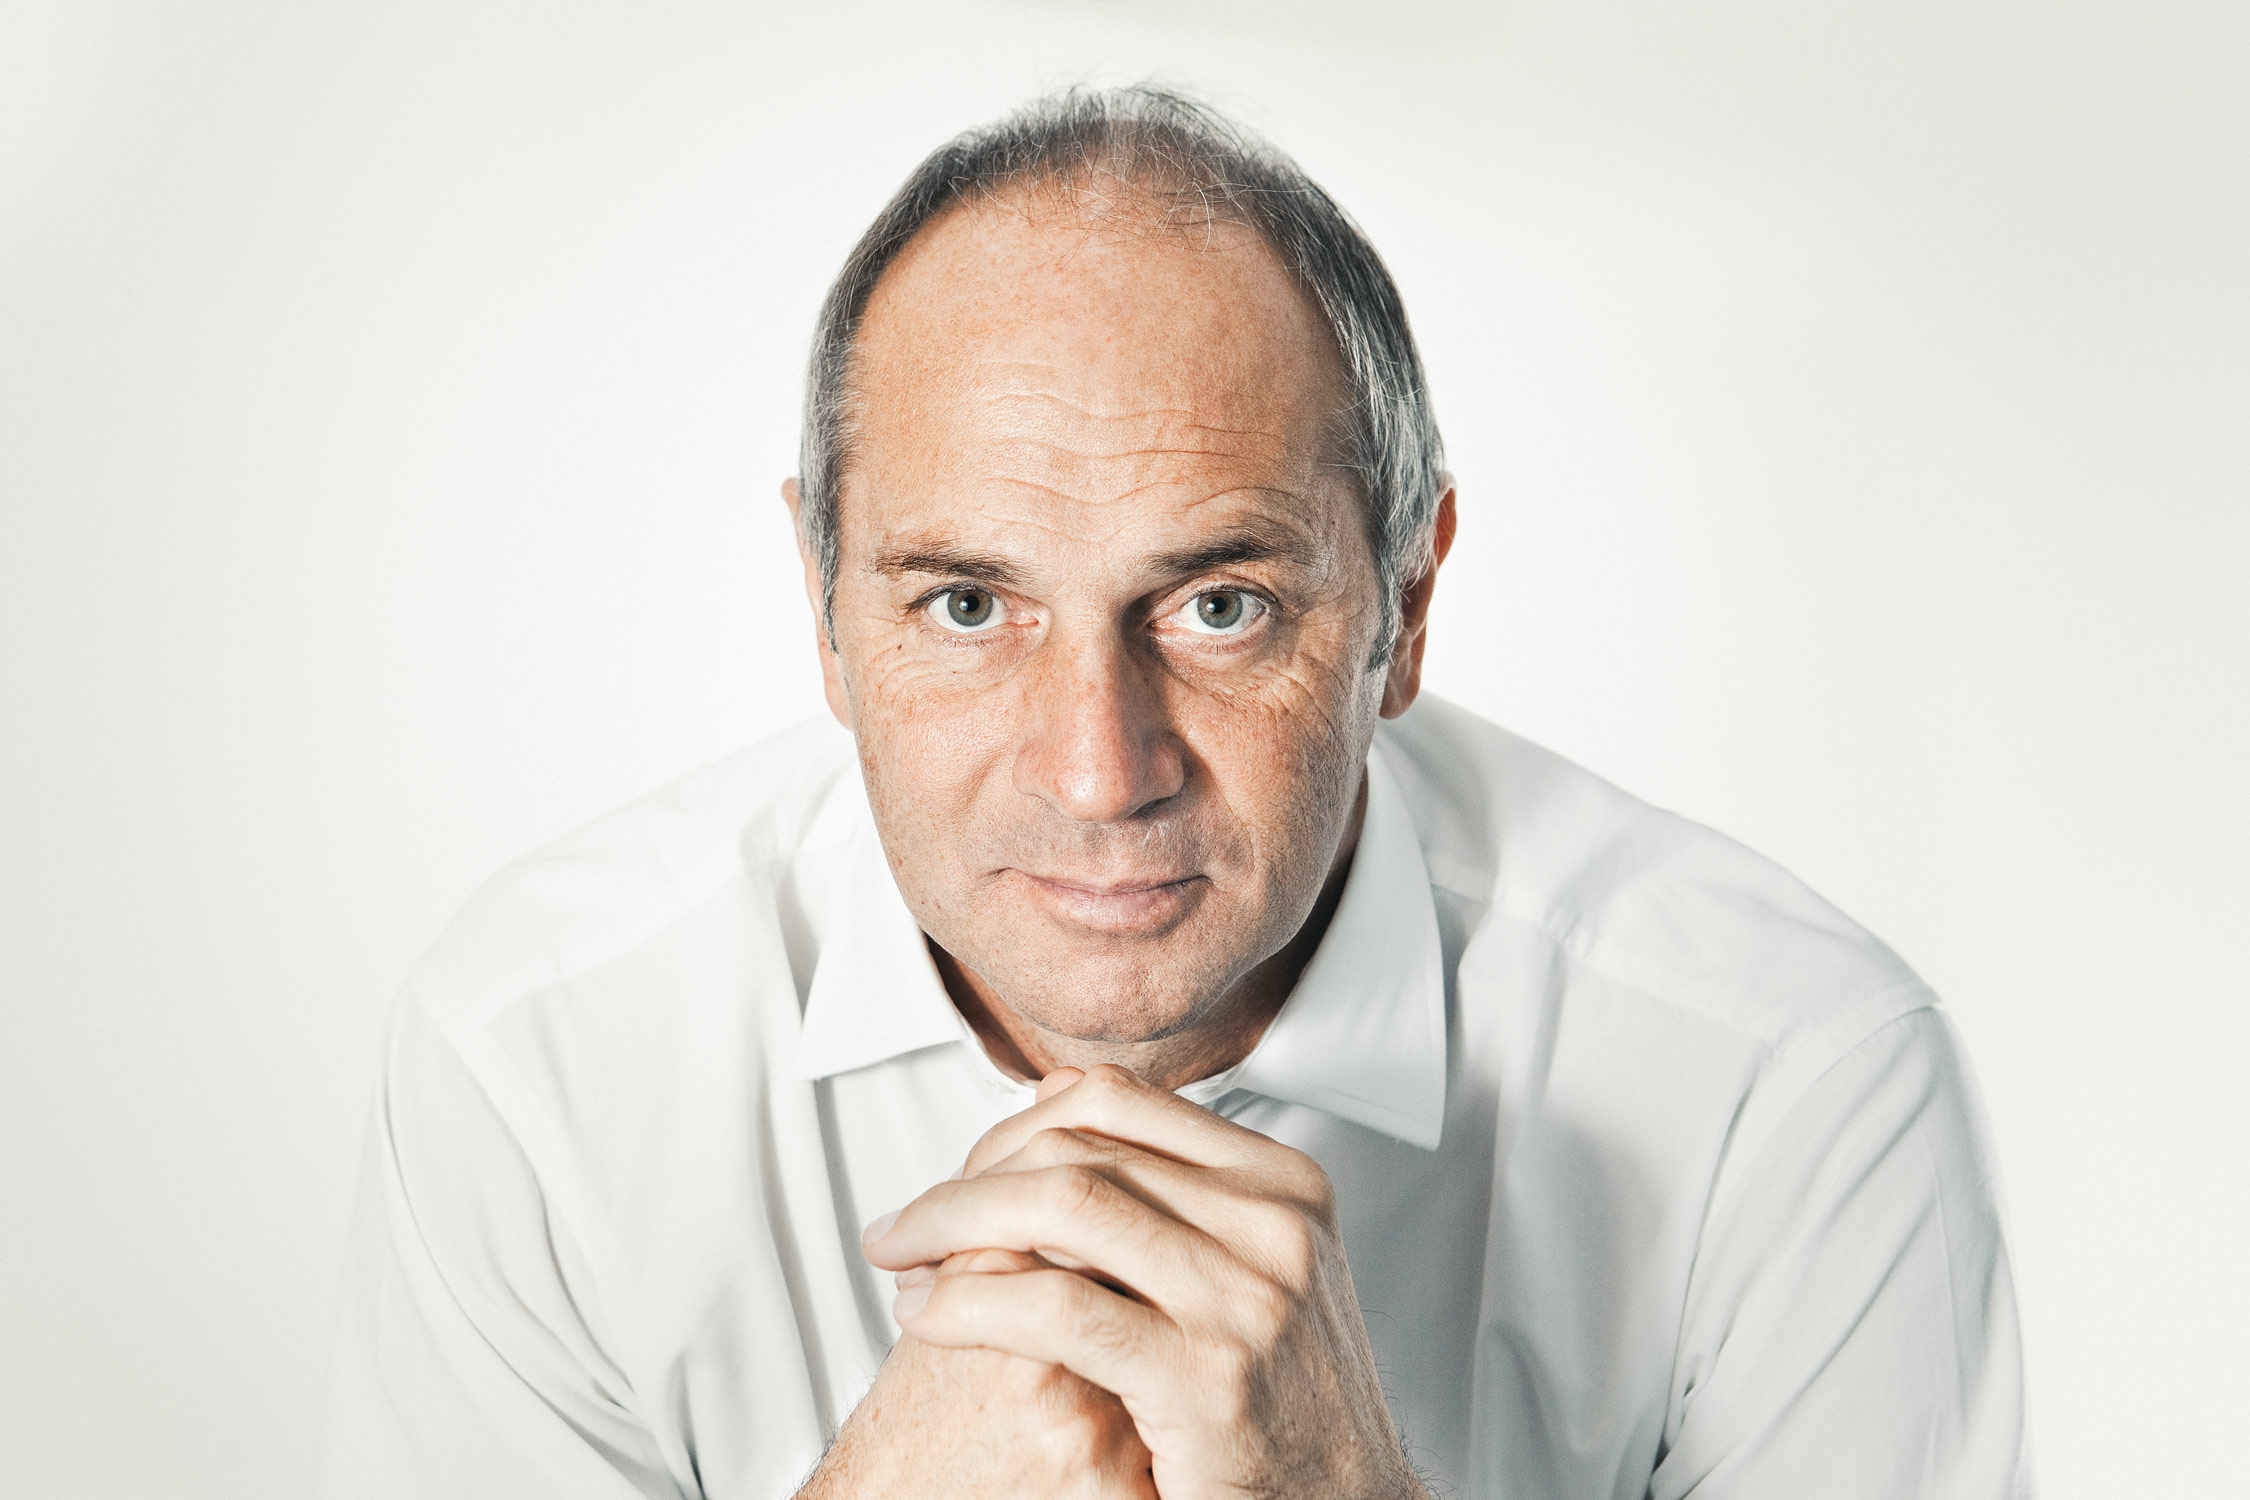 Celebrity portrait photography of Sir Steve Redgrave shot against a white background.